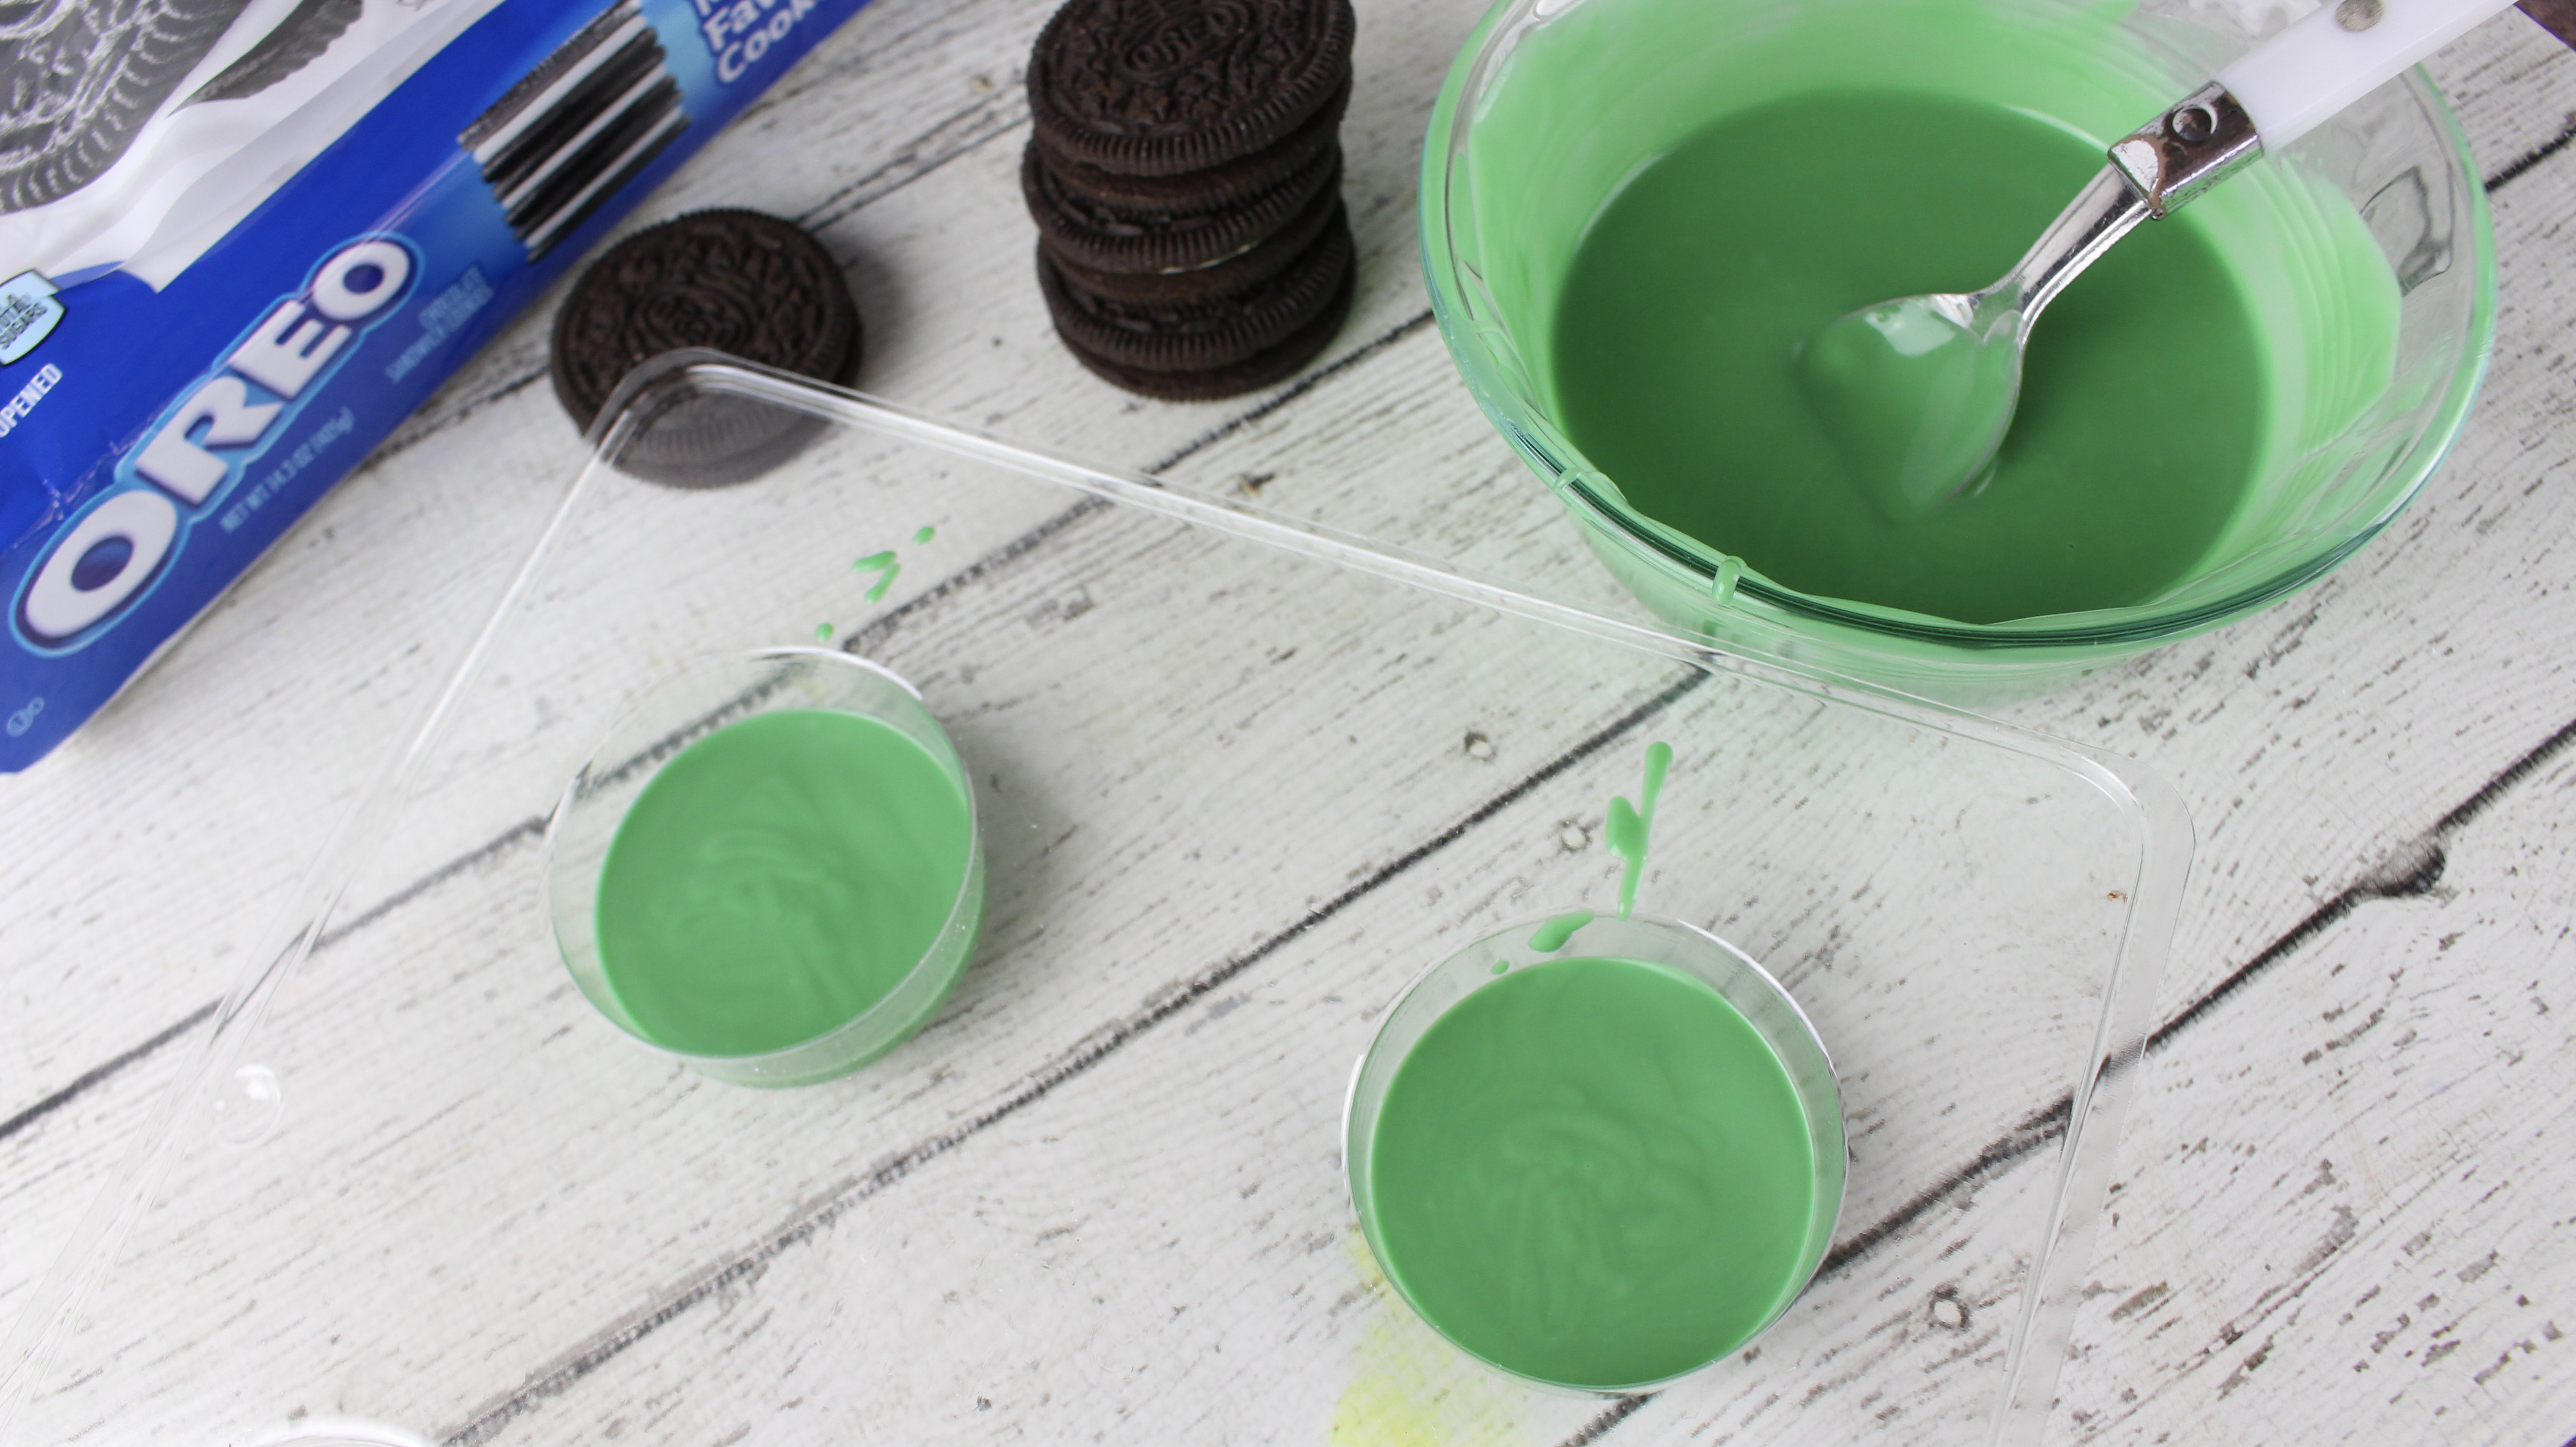 Want to make delicious St. Patrick's Day cookies? These shamrock cookies are made using Oreos and candy melts. Perfect for celebrating St. Patrick's Day.